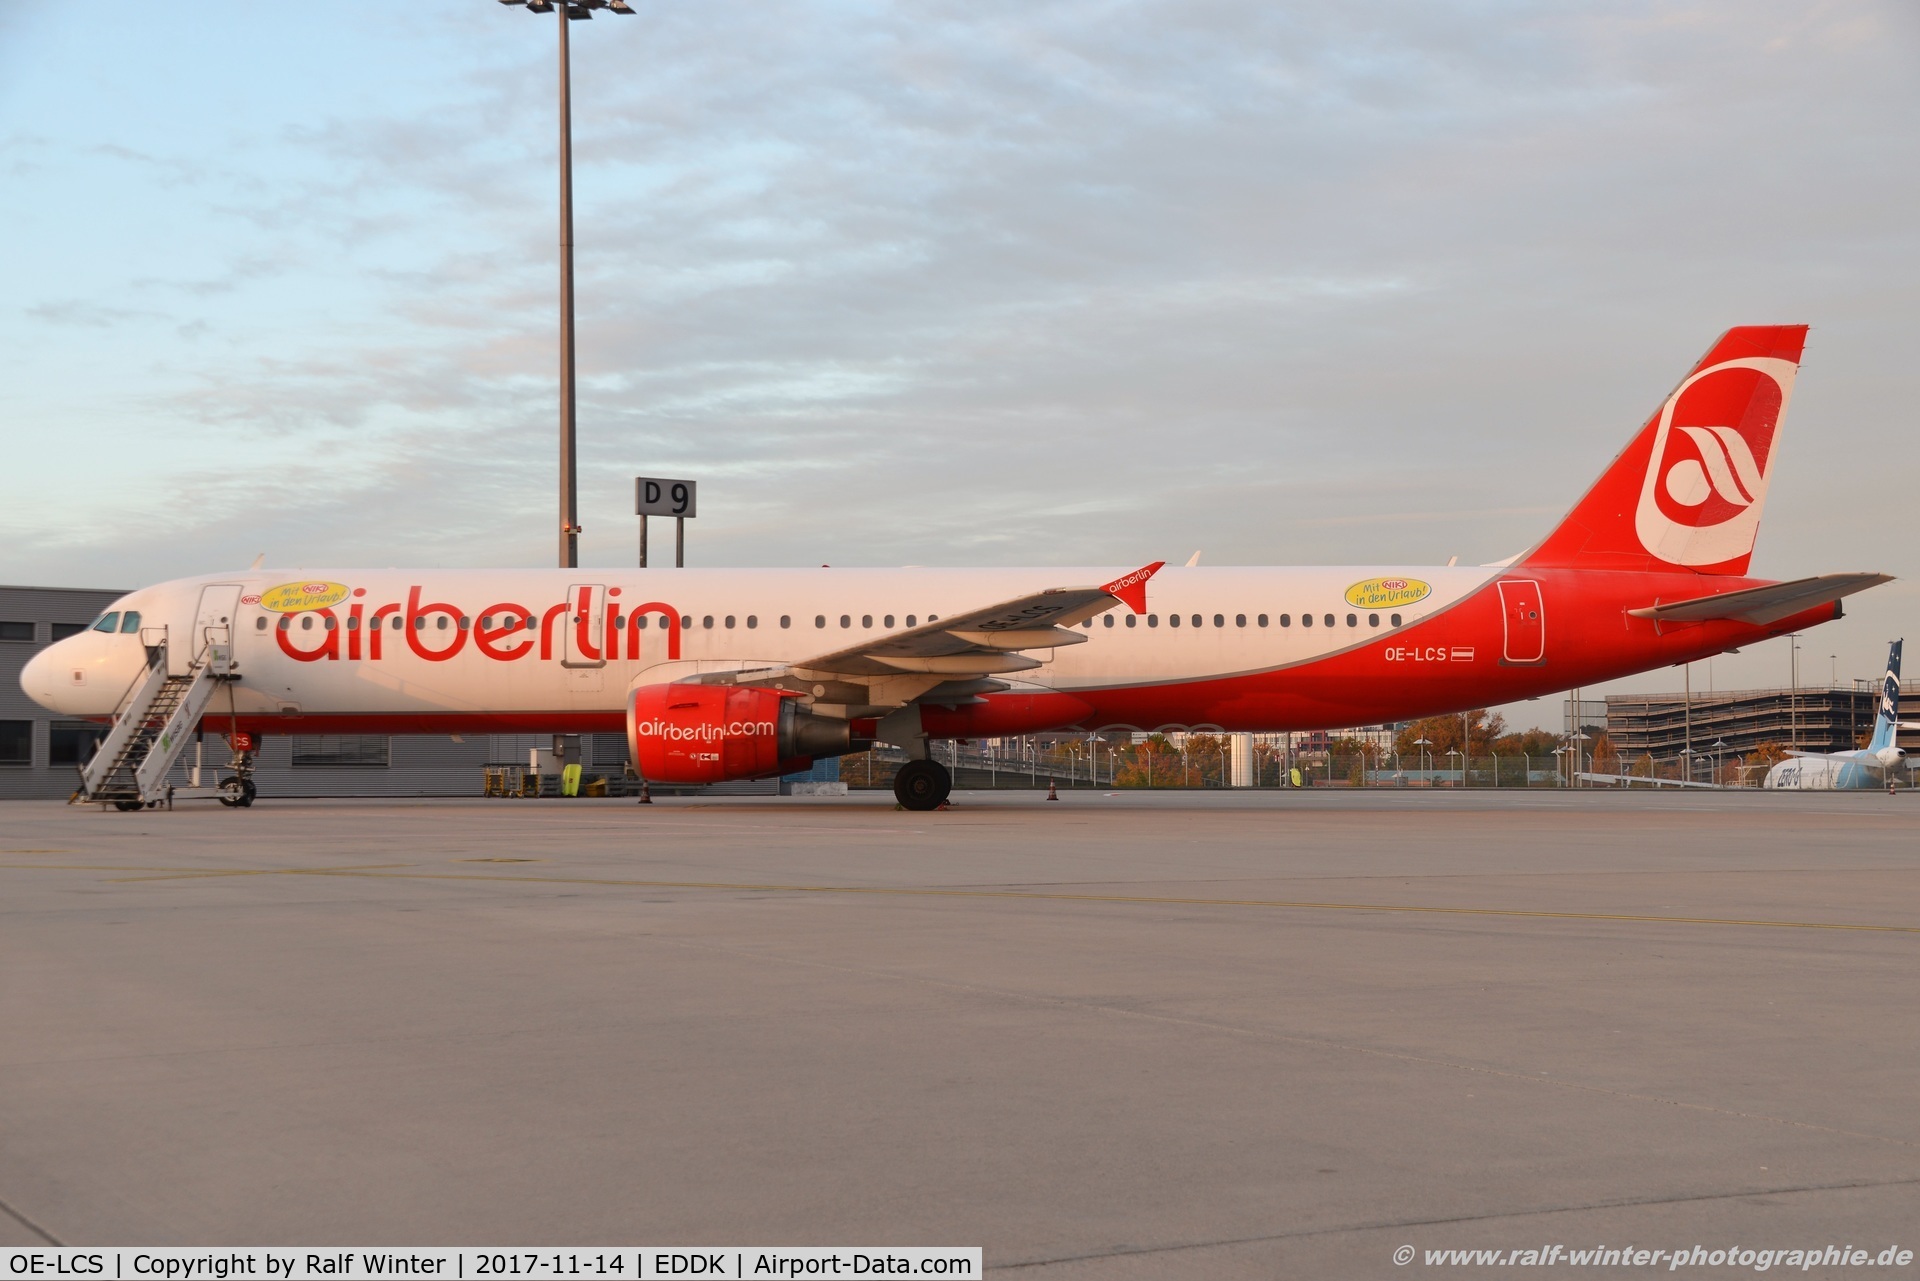 OE-LCS, 2003 Airbus A321-211 C/N 1994, Airbus A321-211 - HG NLY Niki Air Berlin colors 'Fly Nicki' - 1994 - OE-LCS - 14.11.2017 - CGN